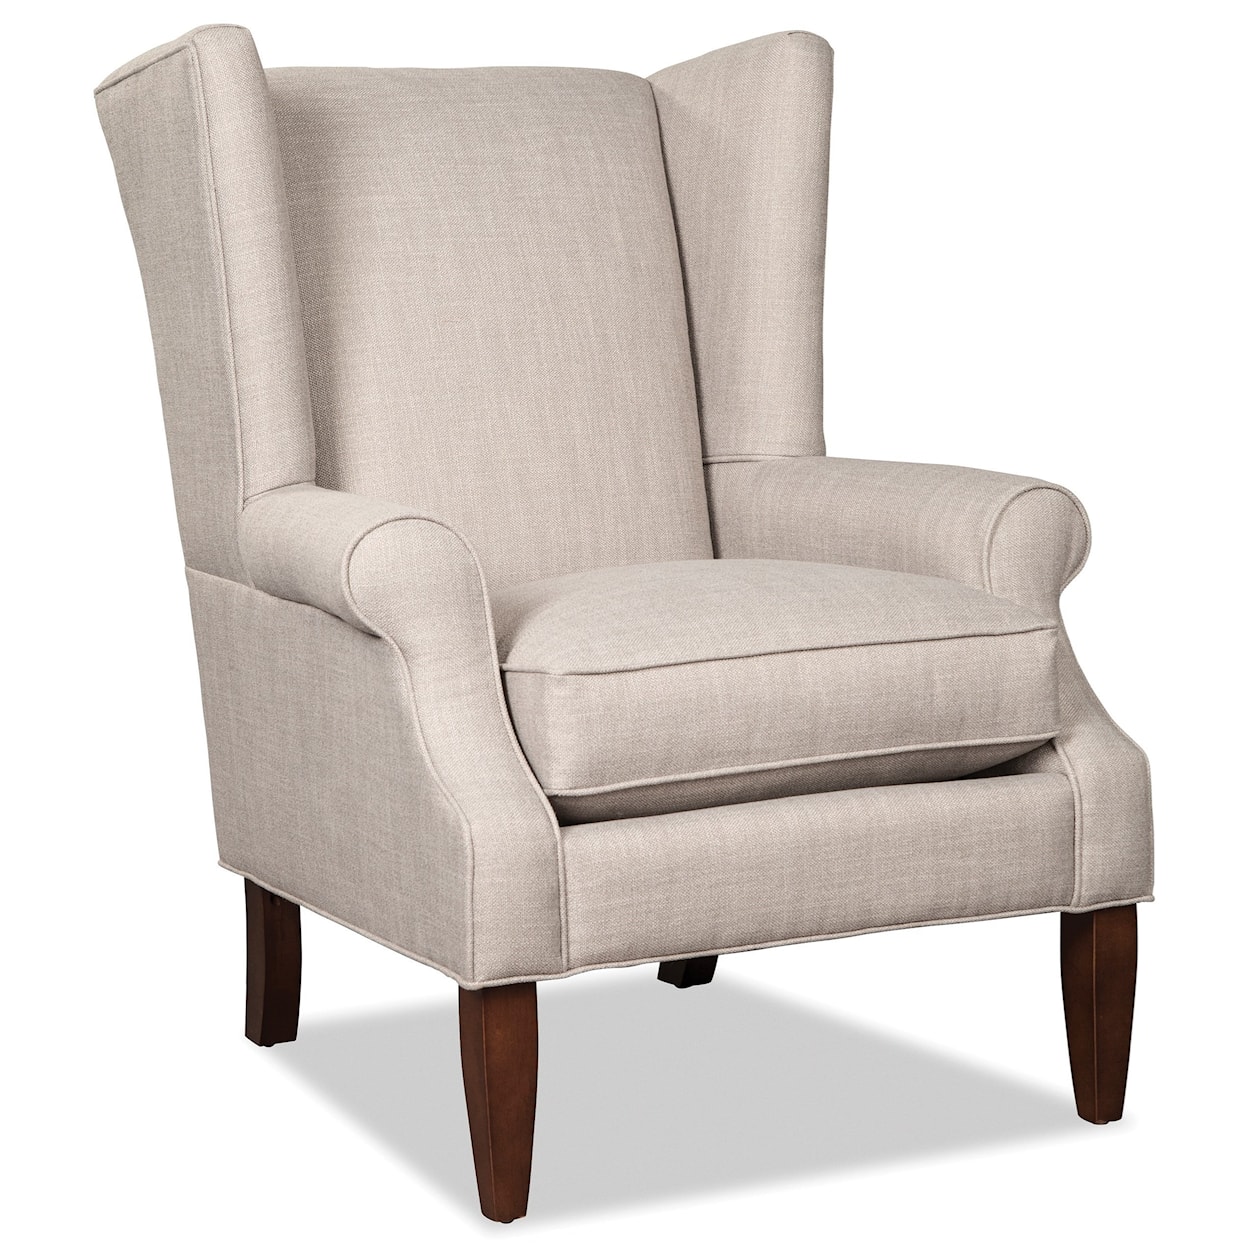 Craftmaster 083610 Wing Chair